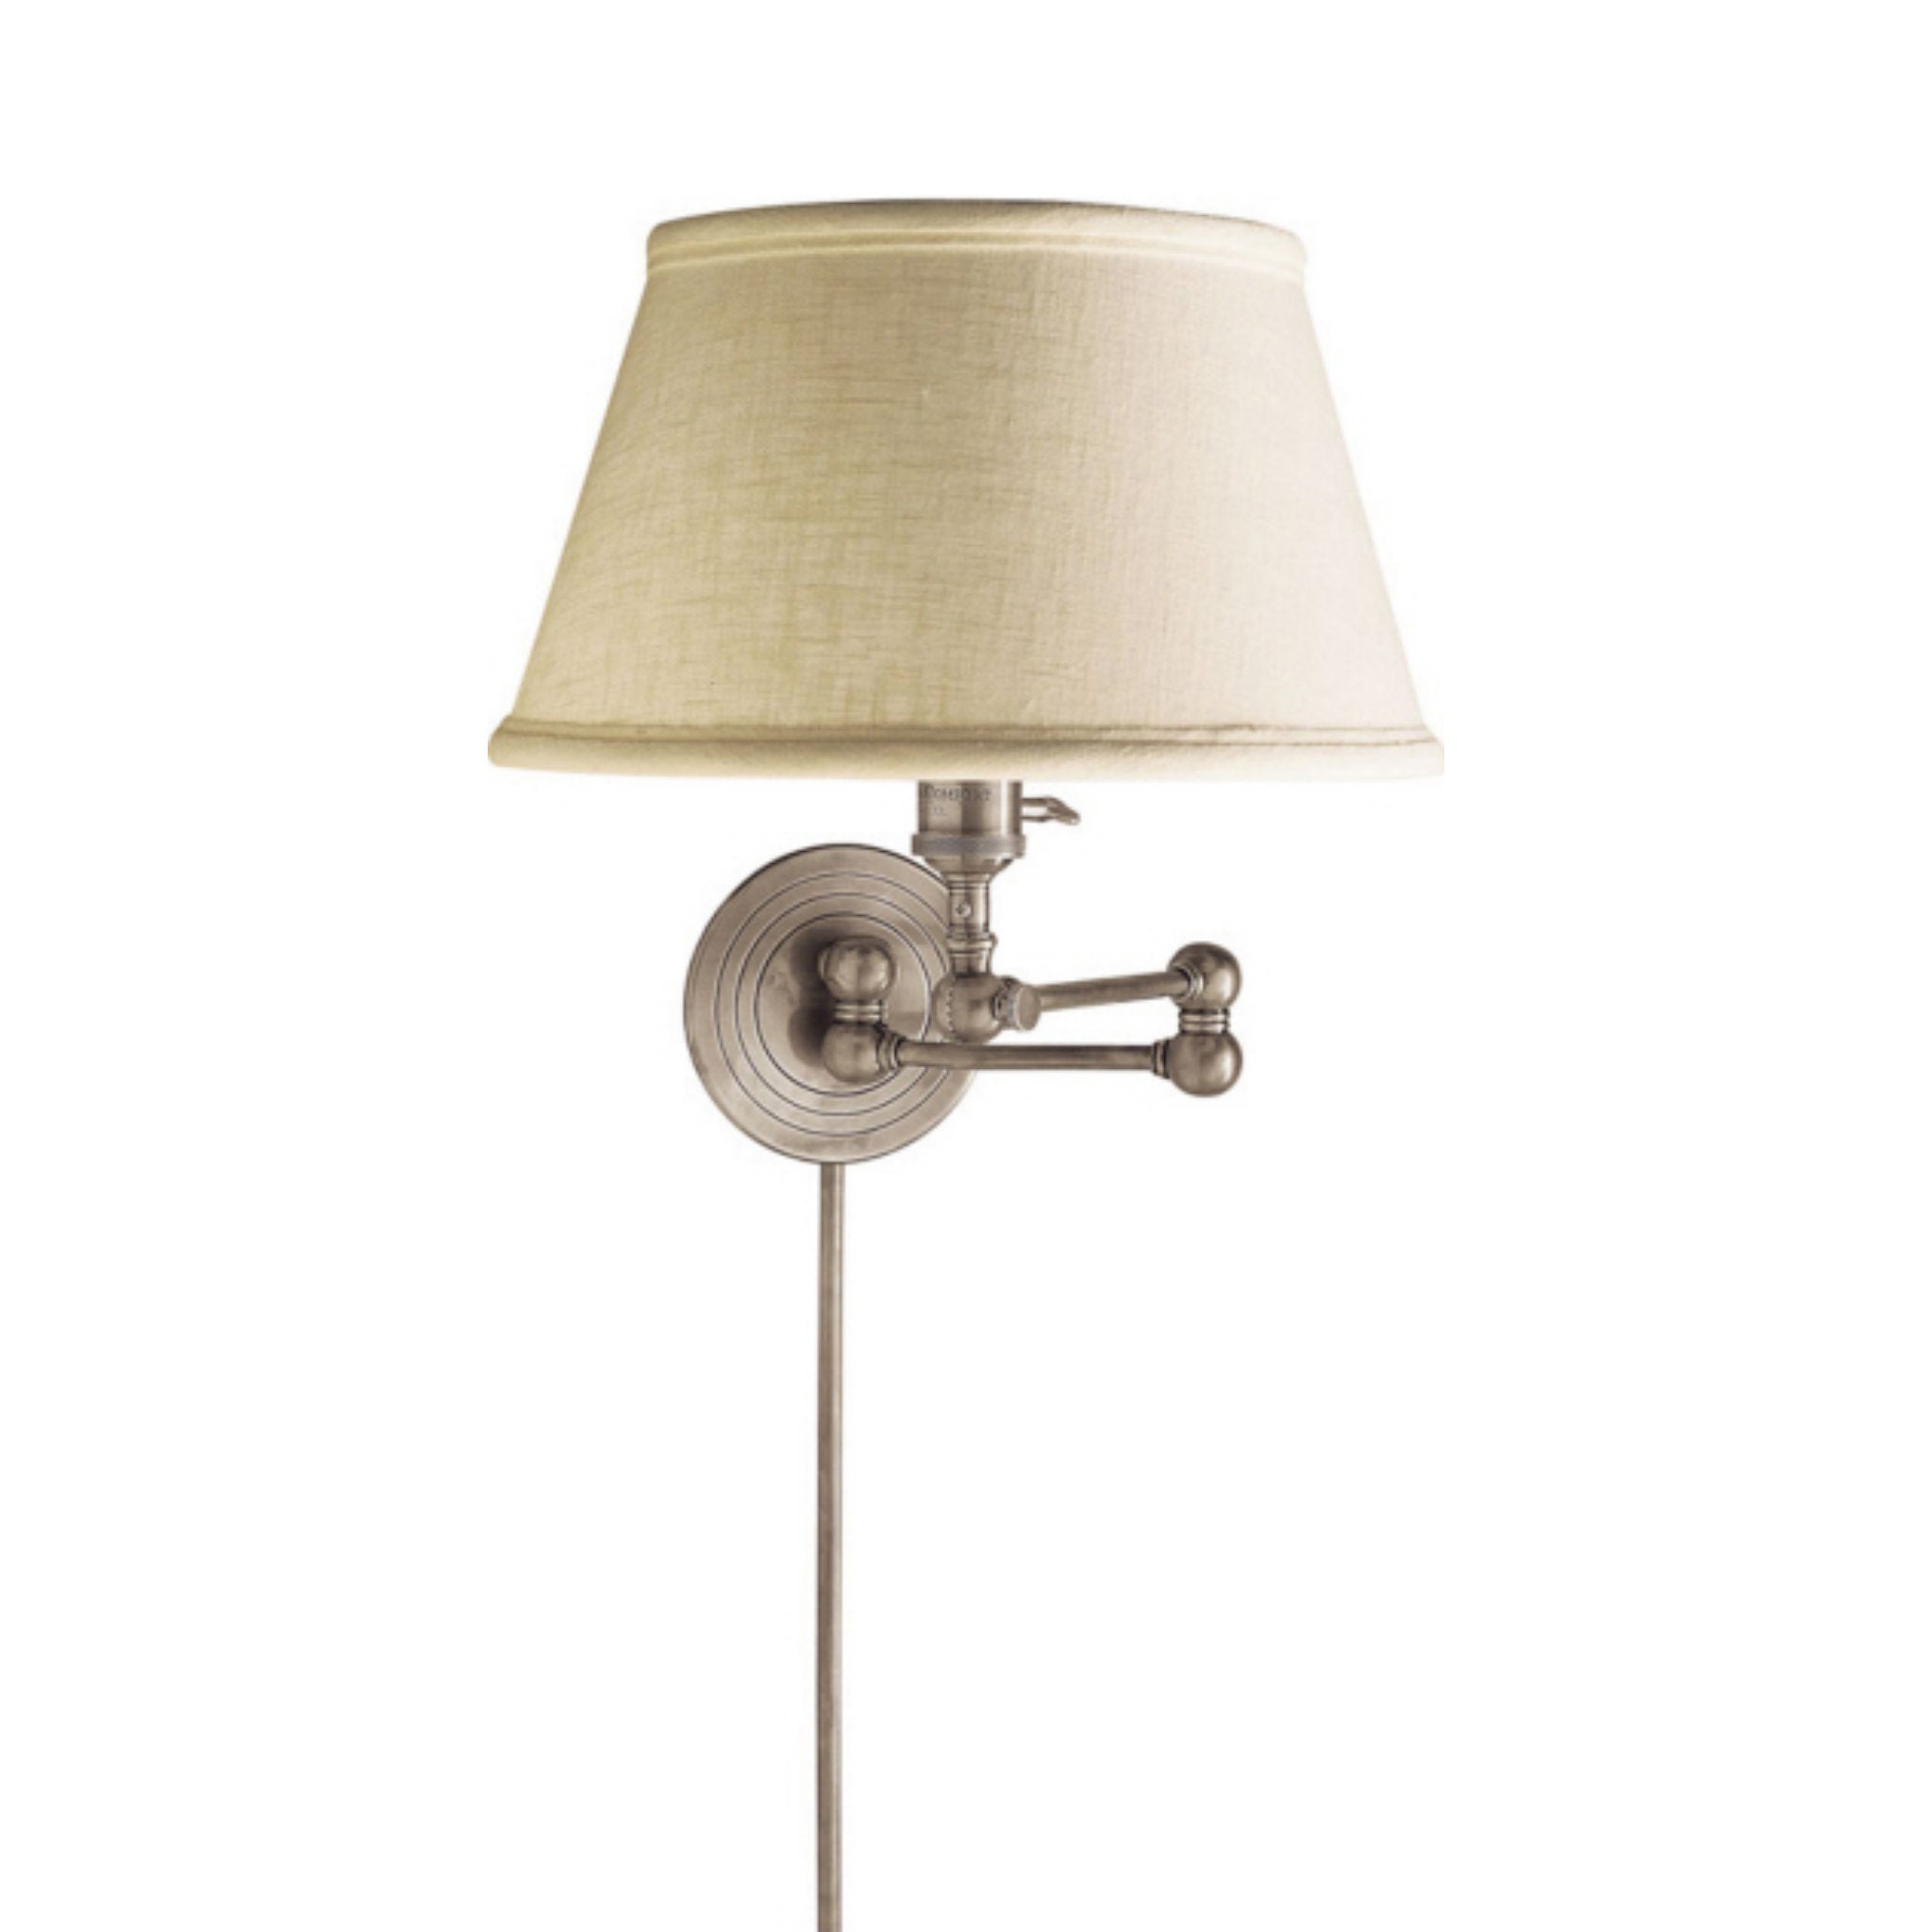 Chapman & Myers Boston Swing Arm in Antique Nickel with Linen Shade